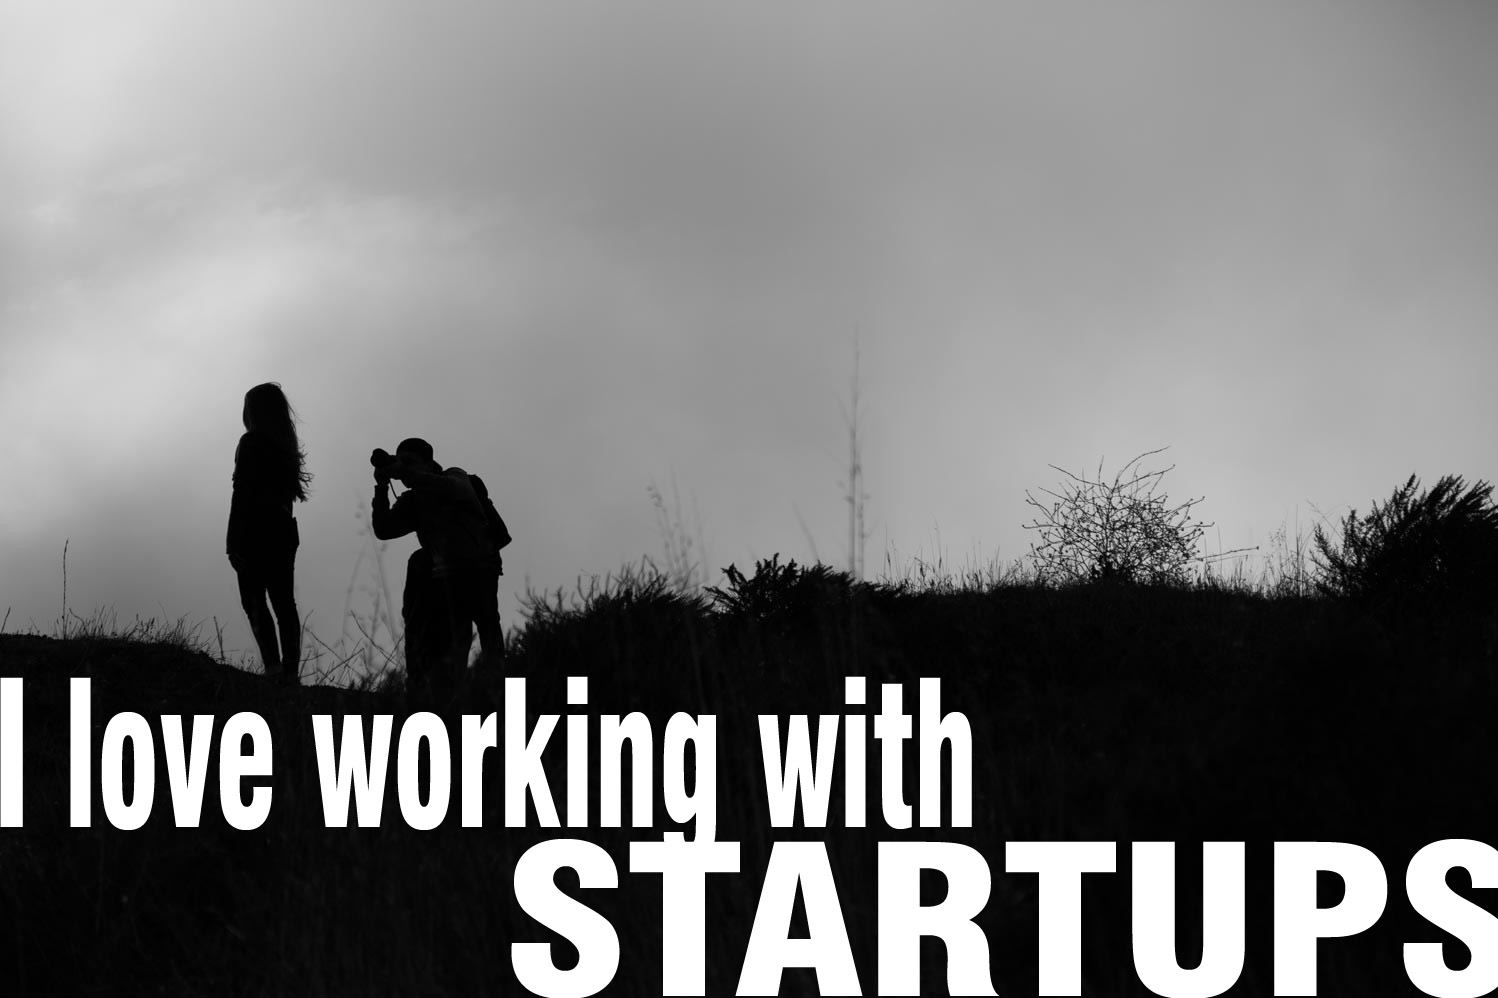 Five Reasons I love working with Startups